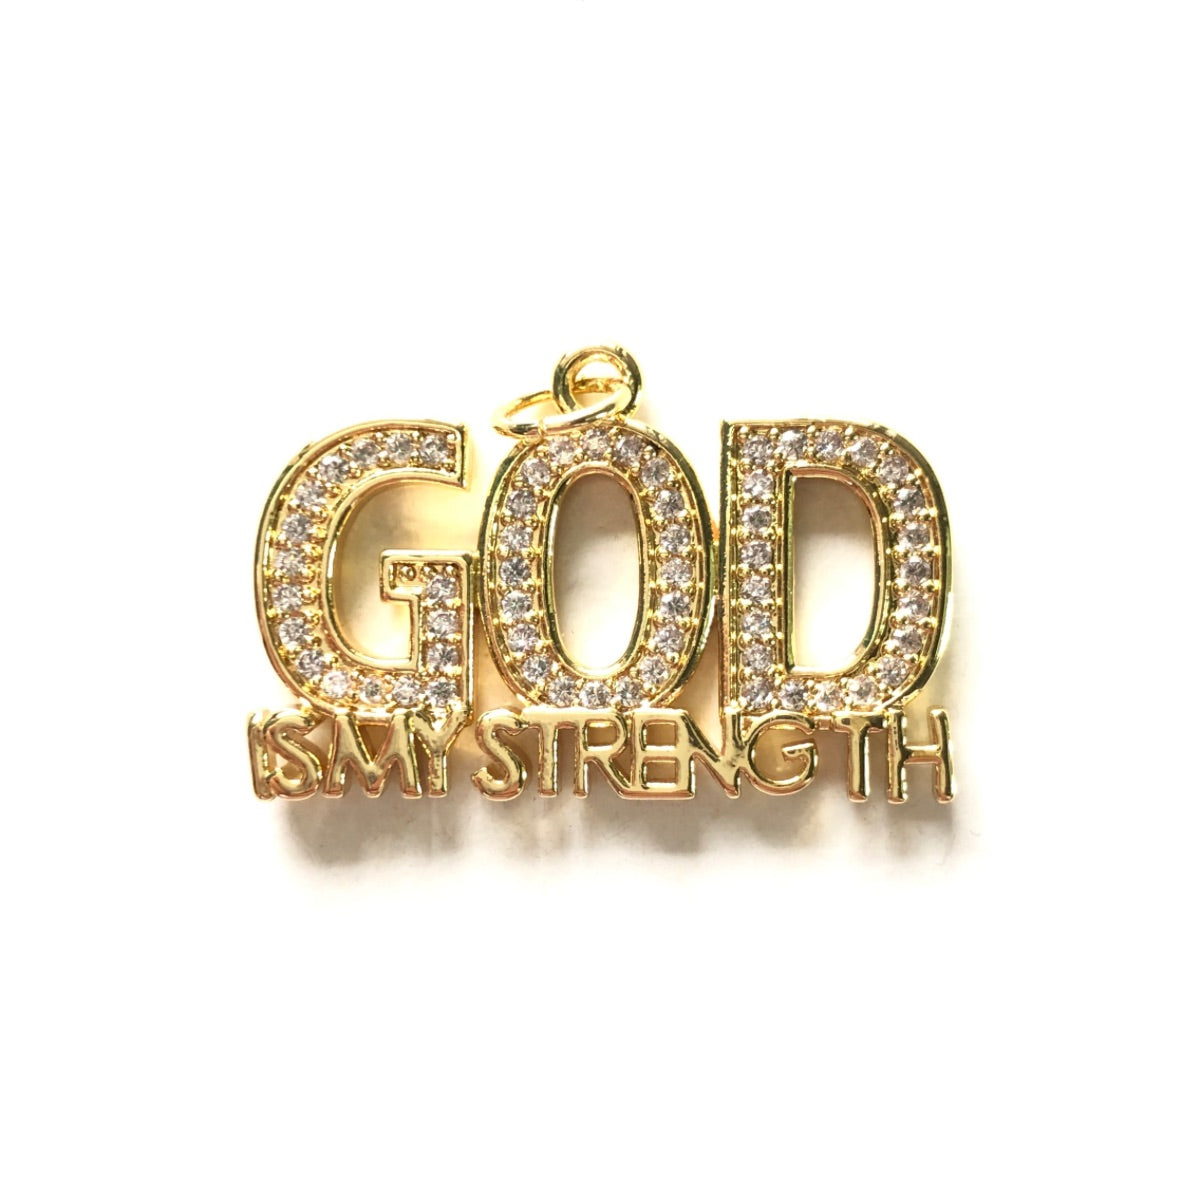 10pcs/lot CZ Paved God Is My Strength Word Charms Gold CZ Paved Charms Christian Quotes New Charms Arrivals Charms Beads Beyond